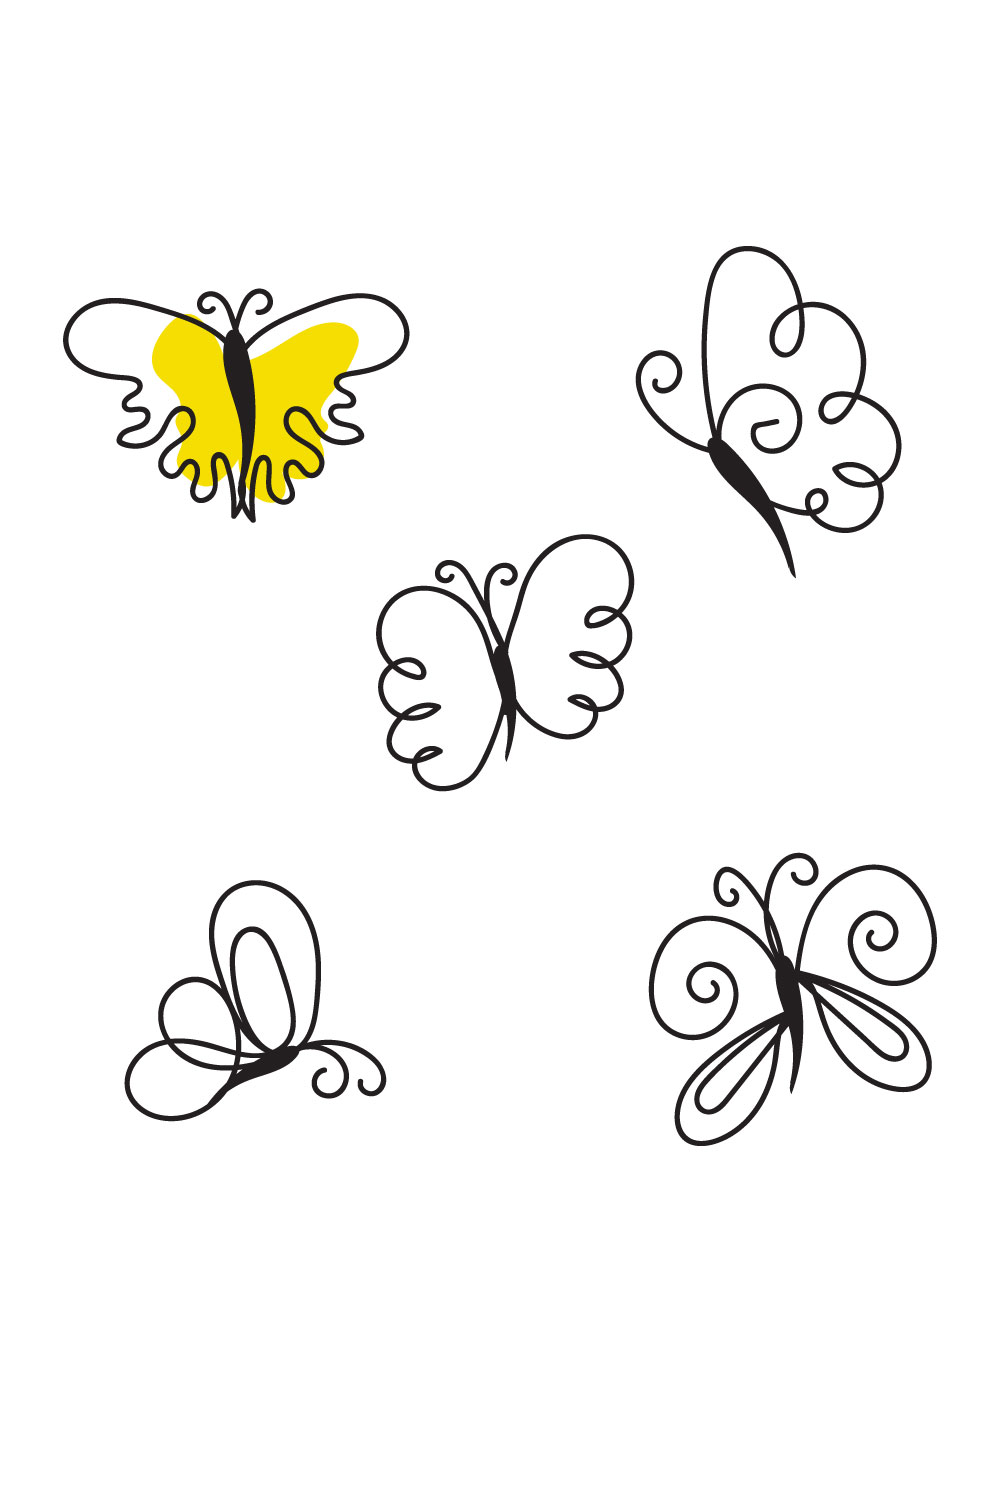 Drawing of four different butterflies on a white background.